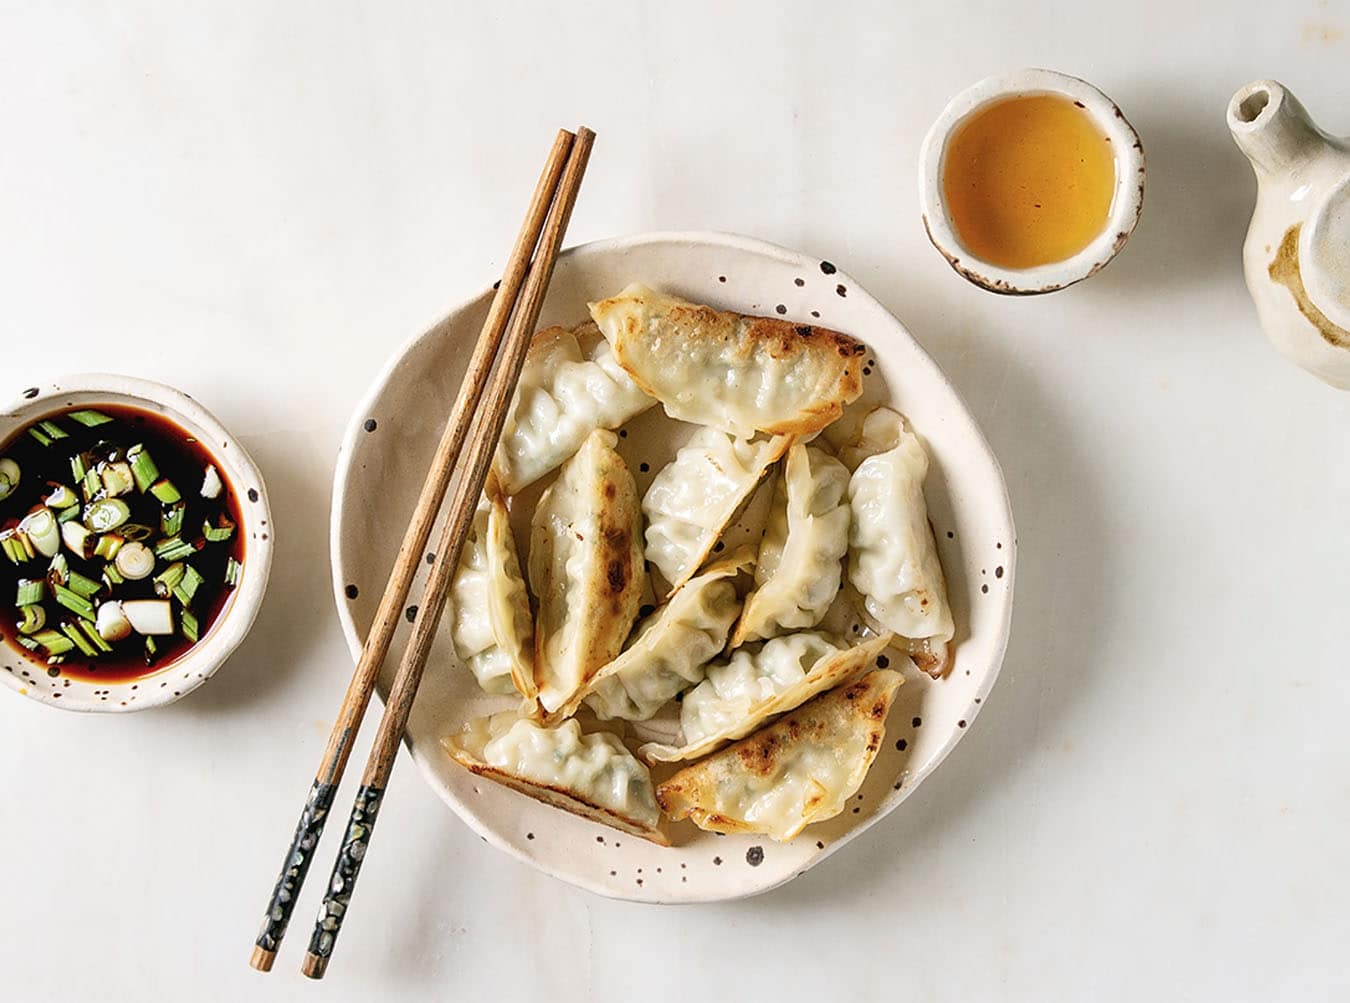 If you get interrupted before eating, and your dumplings cool down too much, reheat them in your air-fryer for two minutes at 350°F.